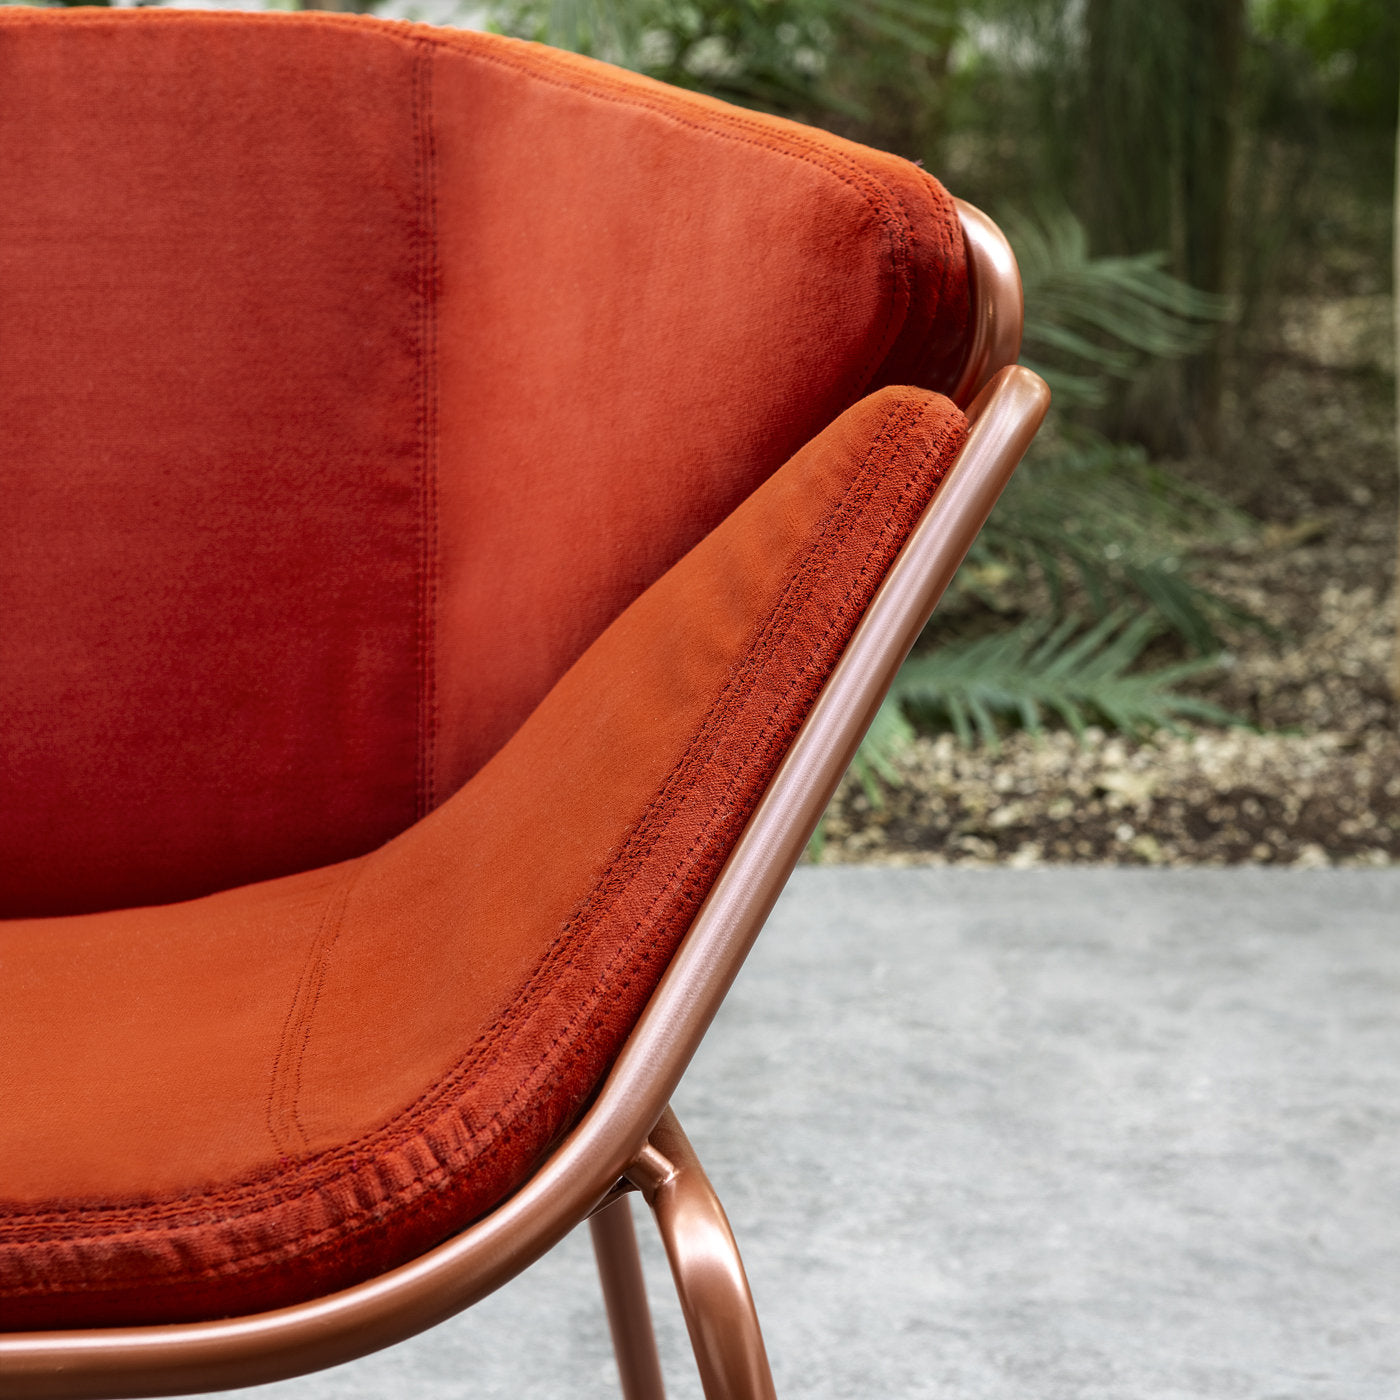 Skin Lounge Red Outdoor Chair By Giacomo Cattani - Alternative view 2